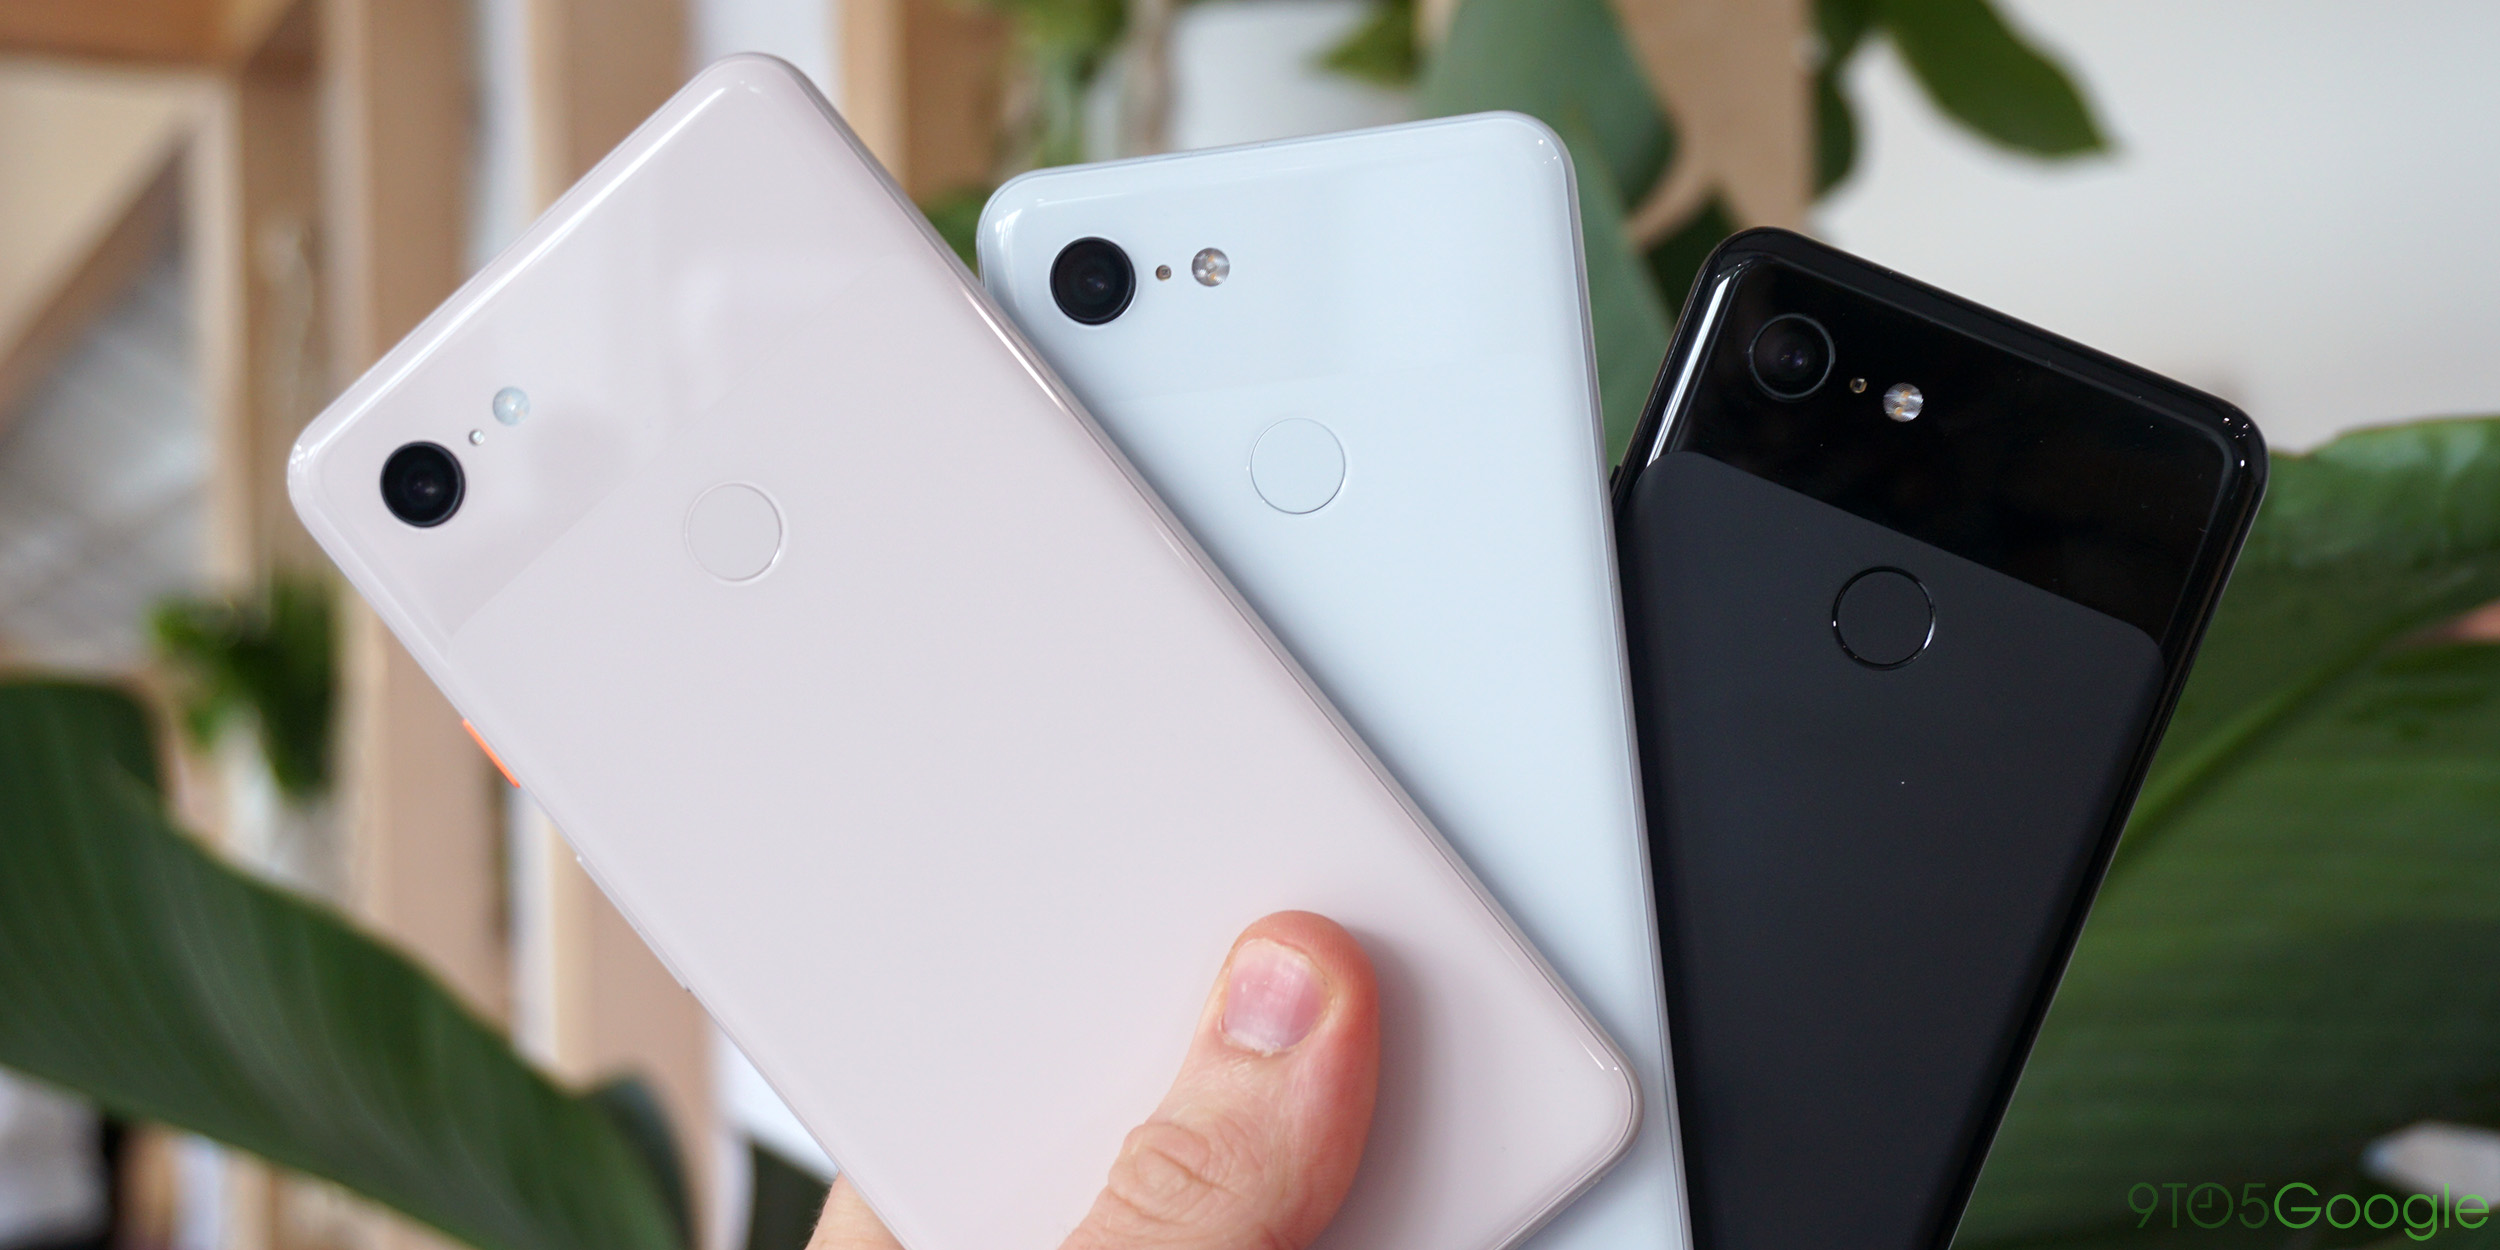 Google Pixel 3 & Pixel 3 XL first impressions: Sheer delight - 9to5Google